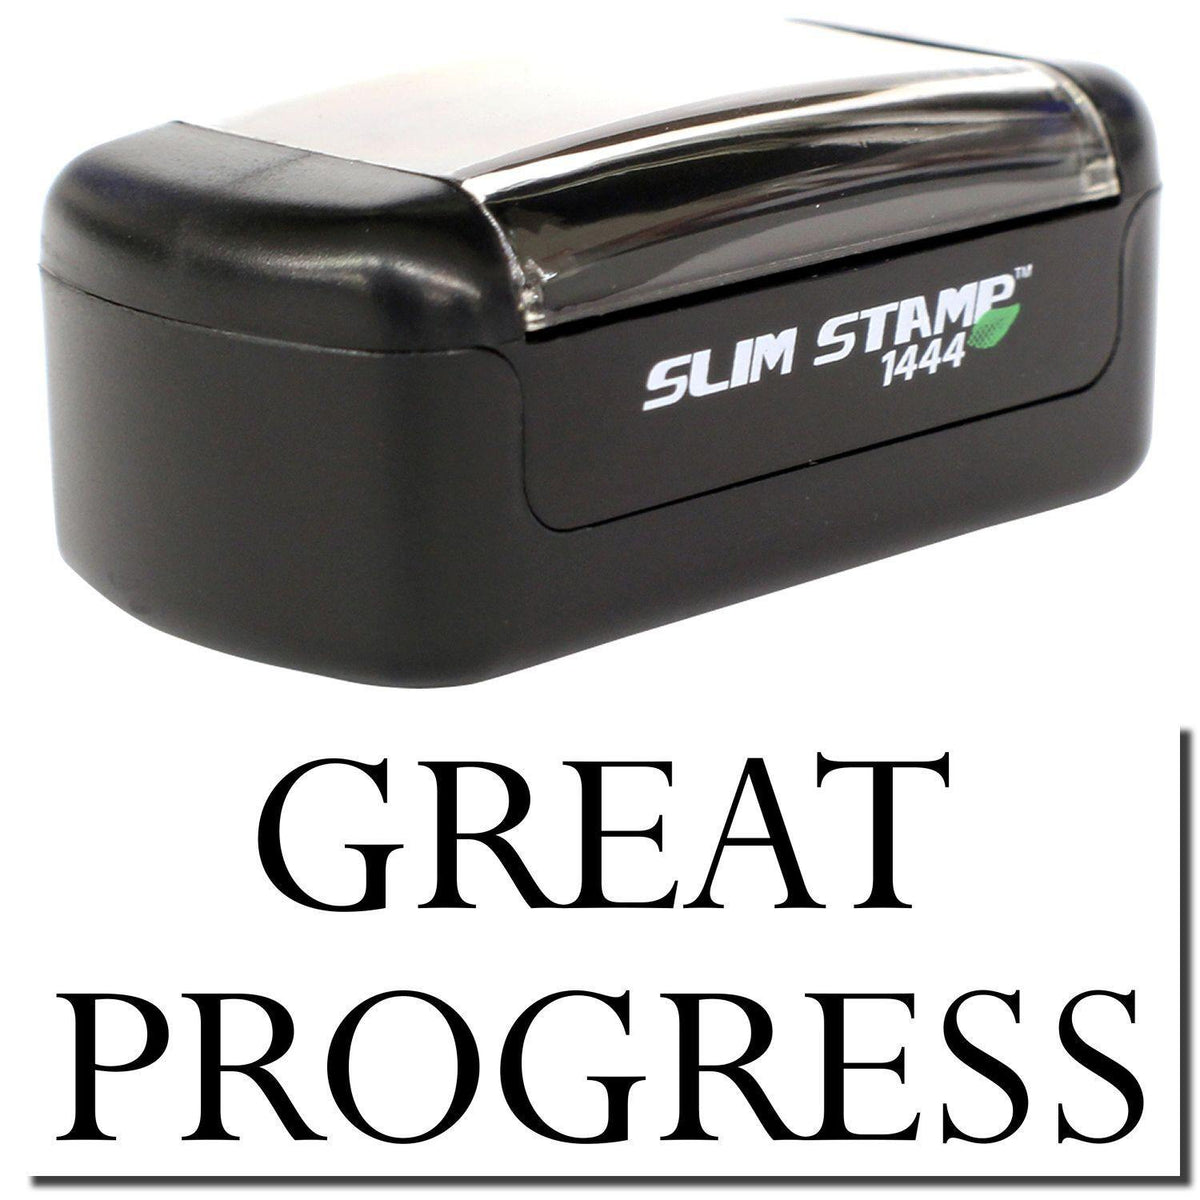 A stock office pre-inked stamp with a stamped image showing how the text &quot;GREAT PROGRESS&quot; is displayed after stamping.